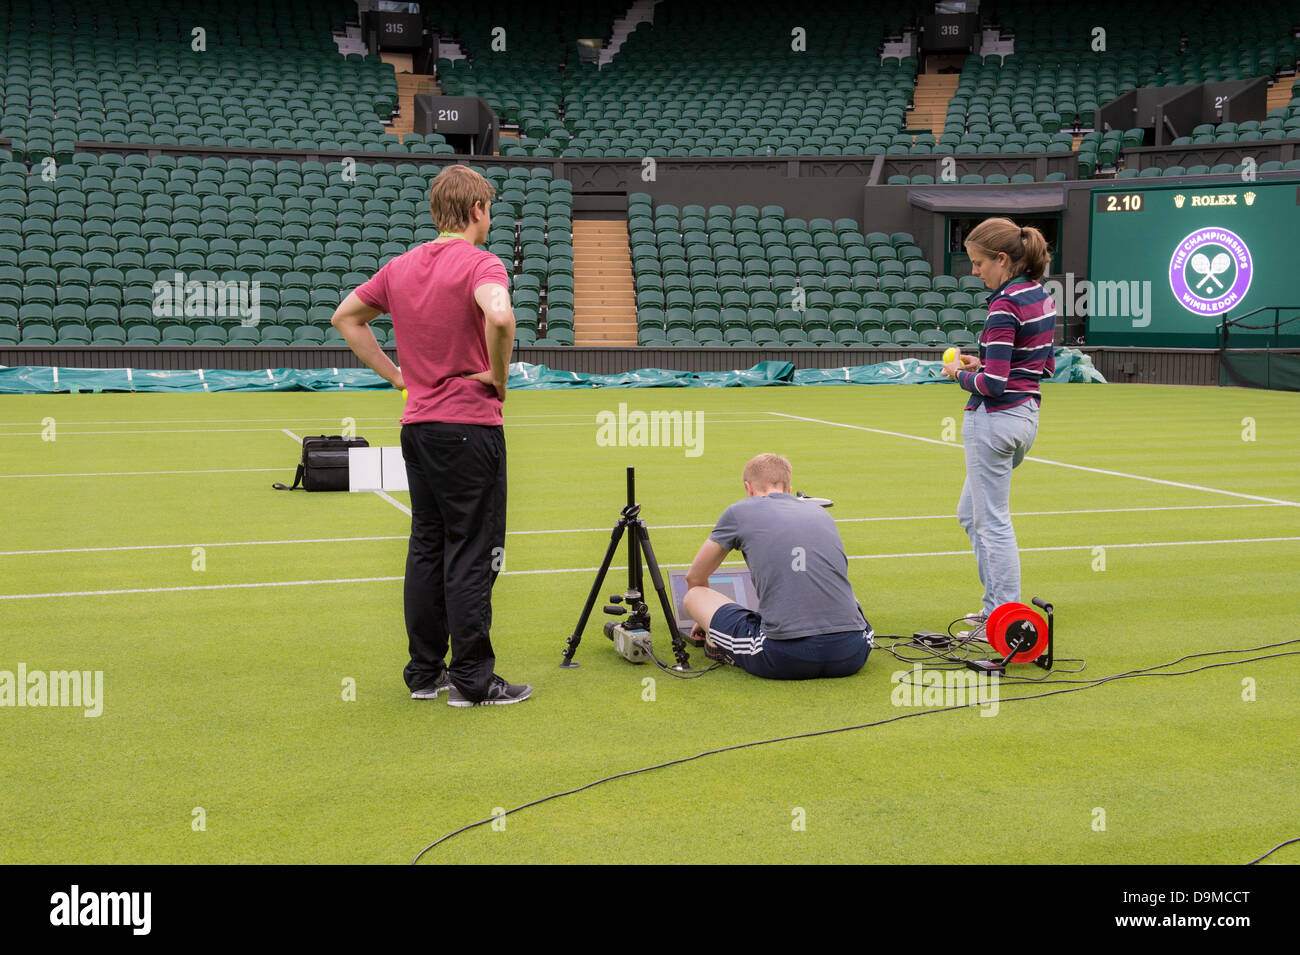 London, UK. 22nd June 2013. Practice and preparations take place ahead of The Wimbledon Tennis Championships 2013 held at The All England Lawn Tennis and Croquet Club. Credit:  Duncan Grove/Alamy Live News Stock Photo